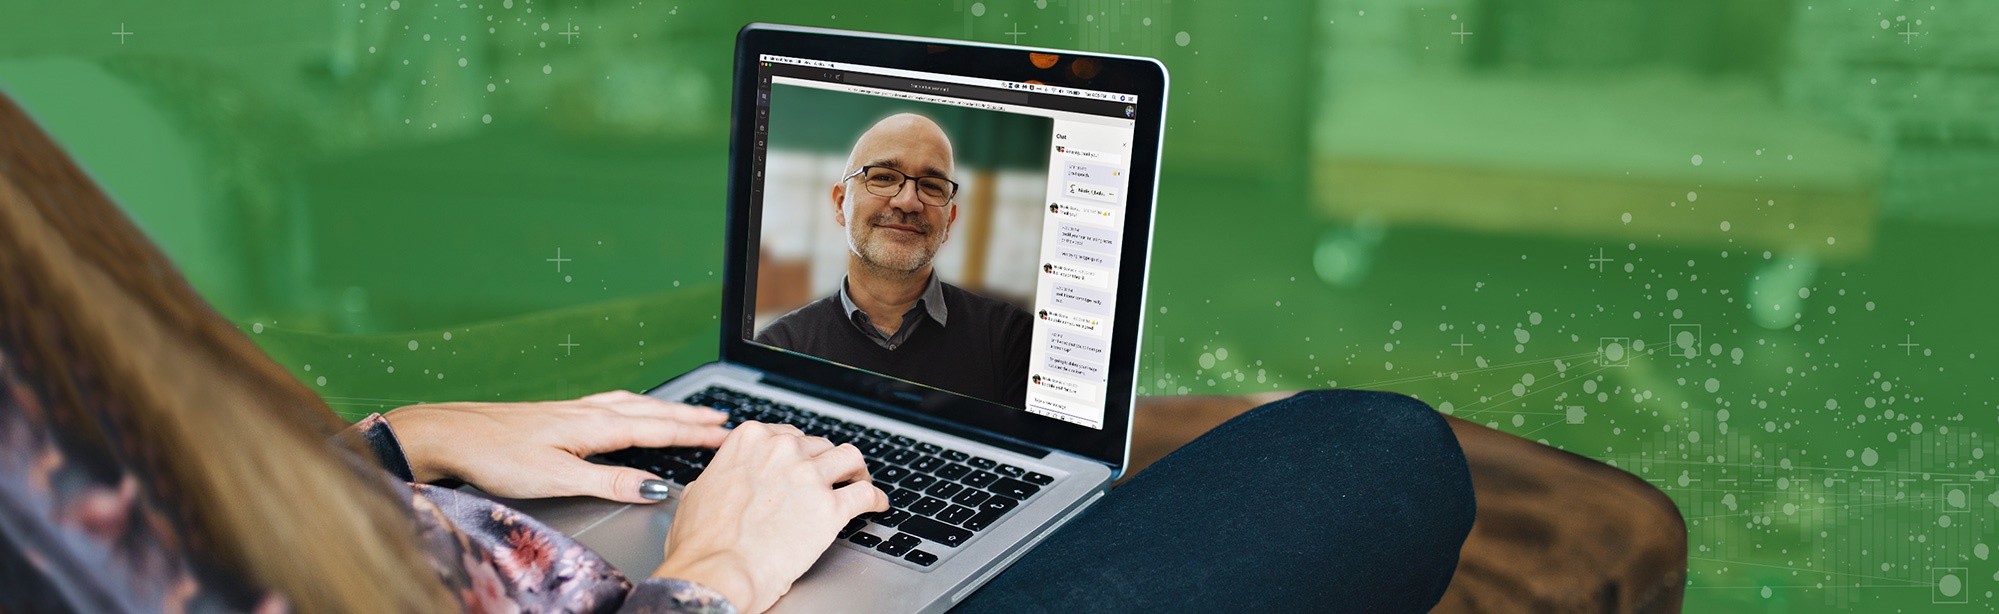 instructor on video chat; Advice for Instructors on How to Cultivate an Interactive Online Classroom